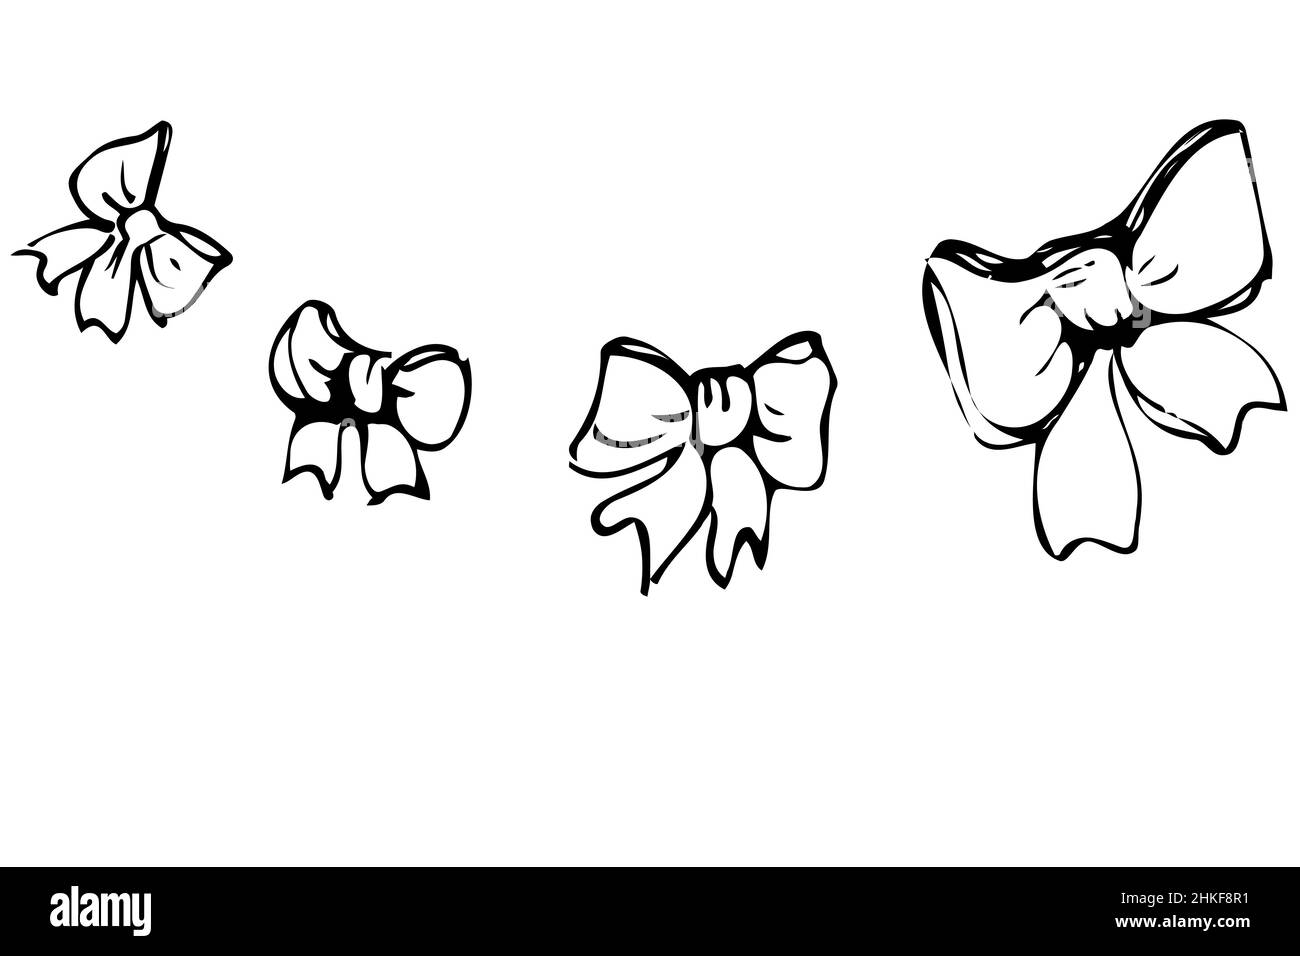 Line drawing bow tie Black and White Stock Photos & Images - Alamy